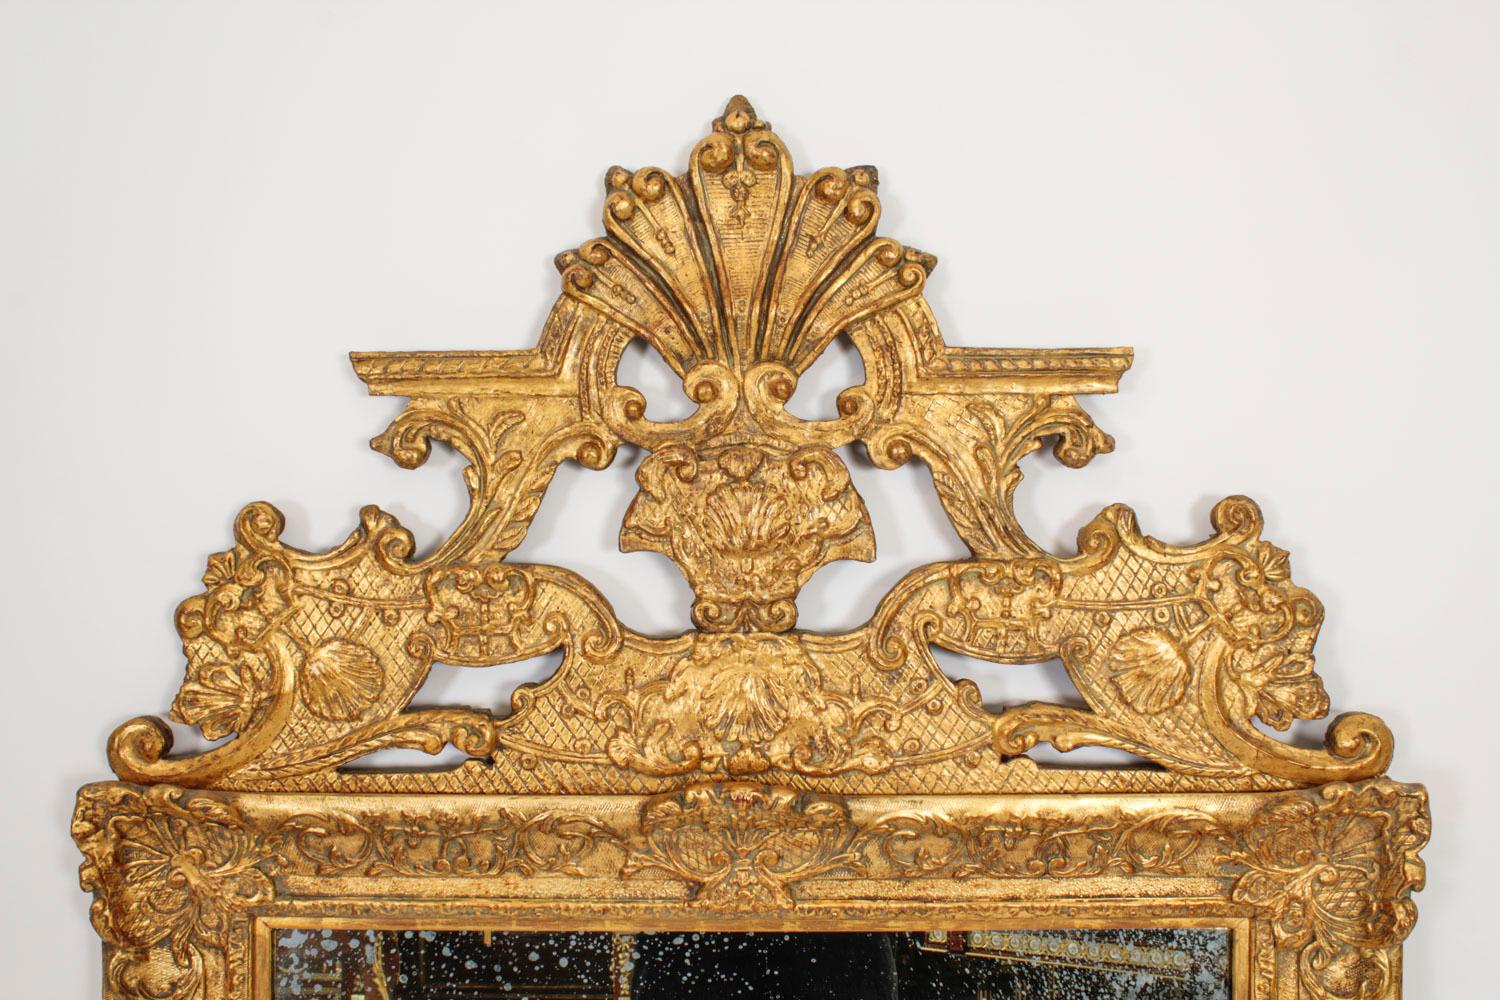 This is a large impressive antique French Louis XIV carved giltwood and gesso wall mirror, Circa 1760 in date.

The frame is surmounted with an elaborate carved and pierced giltwood central finial with shell anthemion, acanthus leaf, foliage and